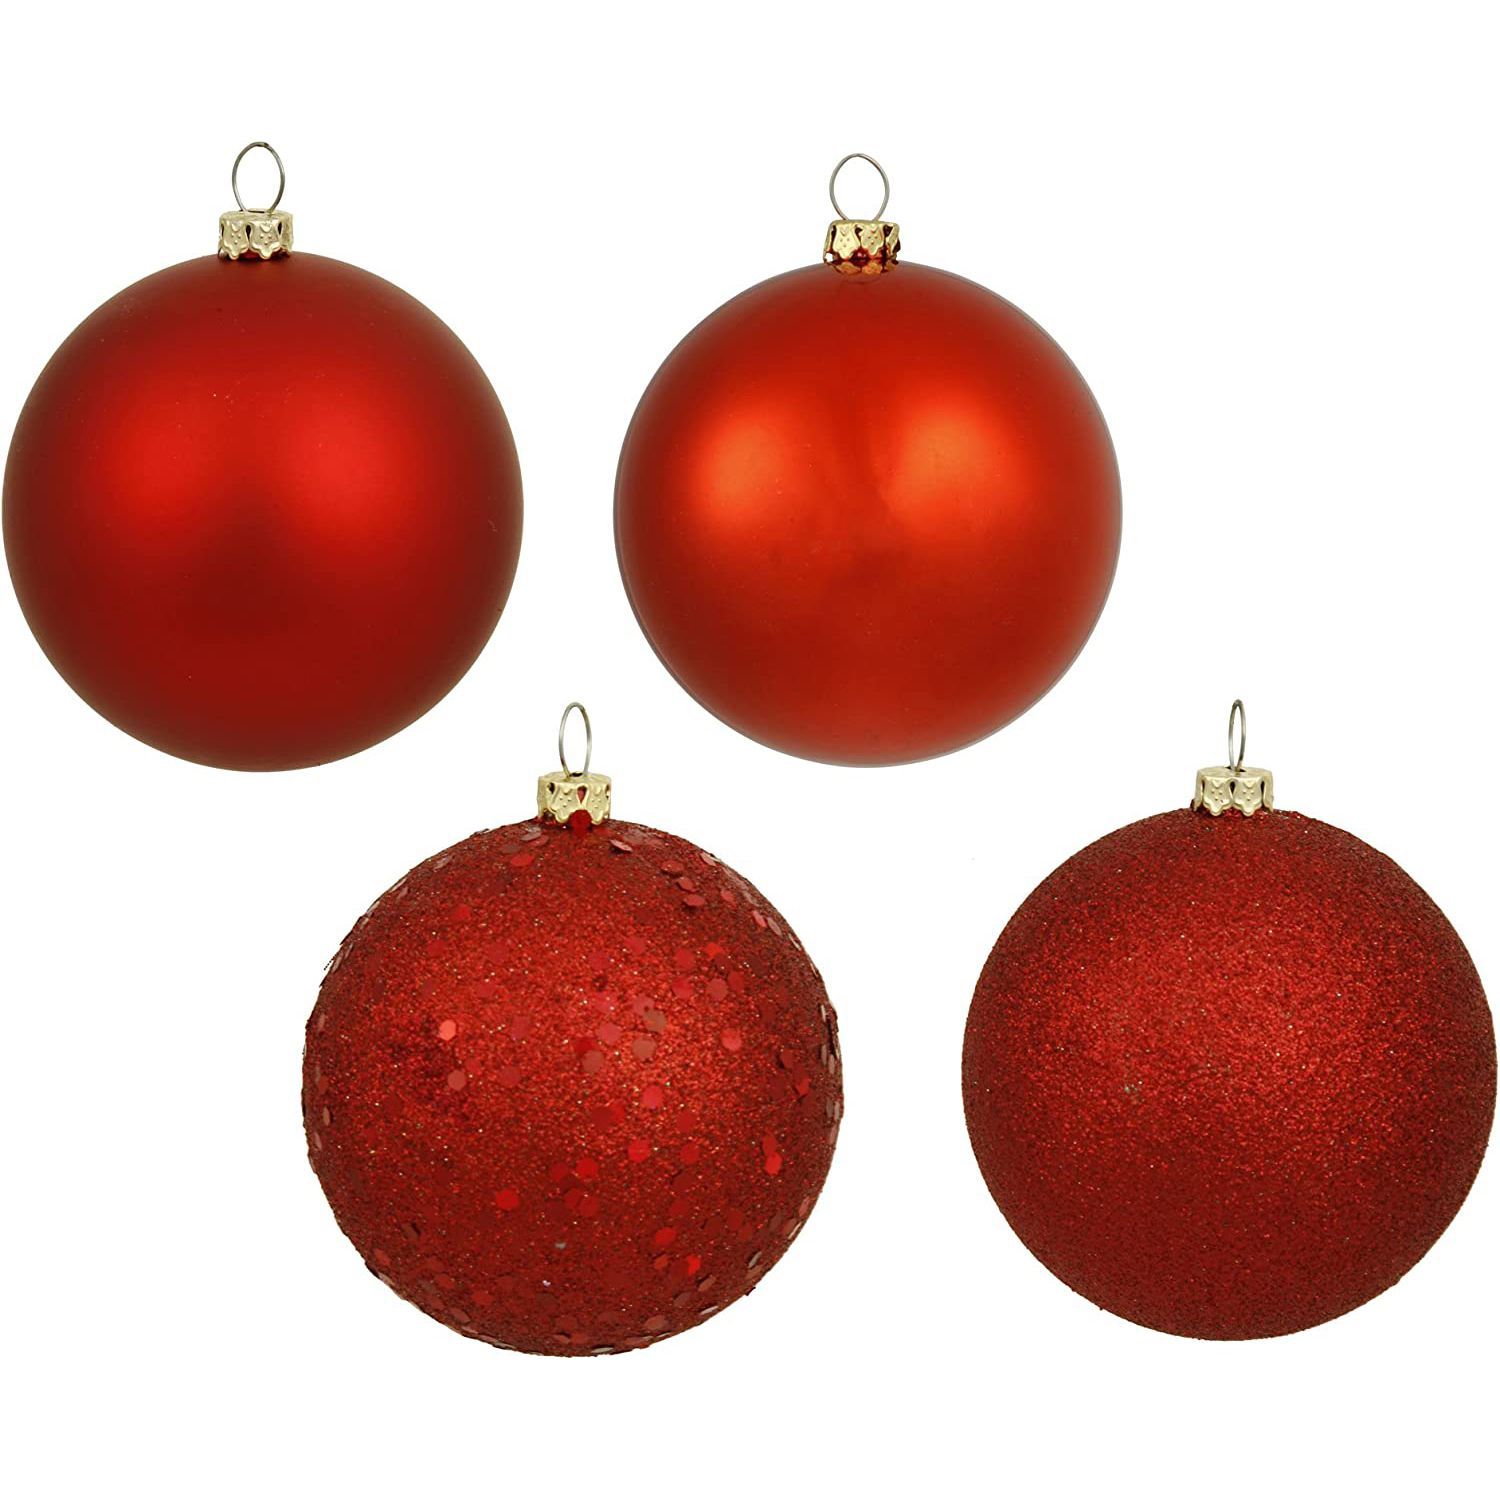 Inexpensive Large Christmas Ornaments - Best Giant Holiday Decor